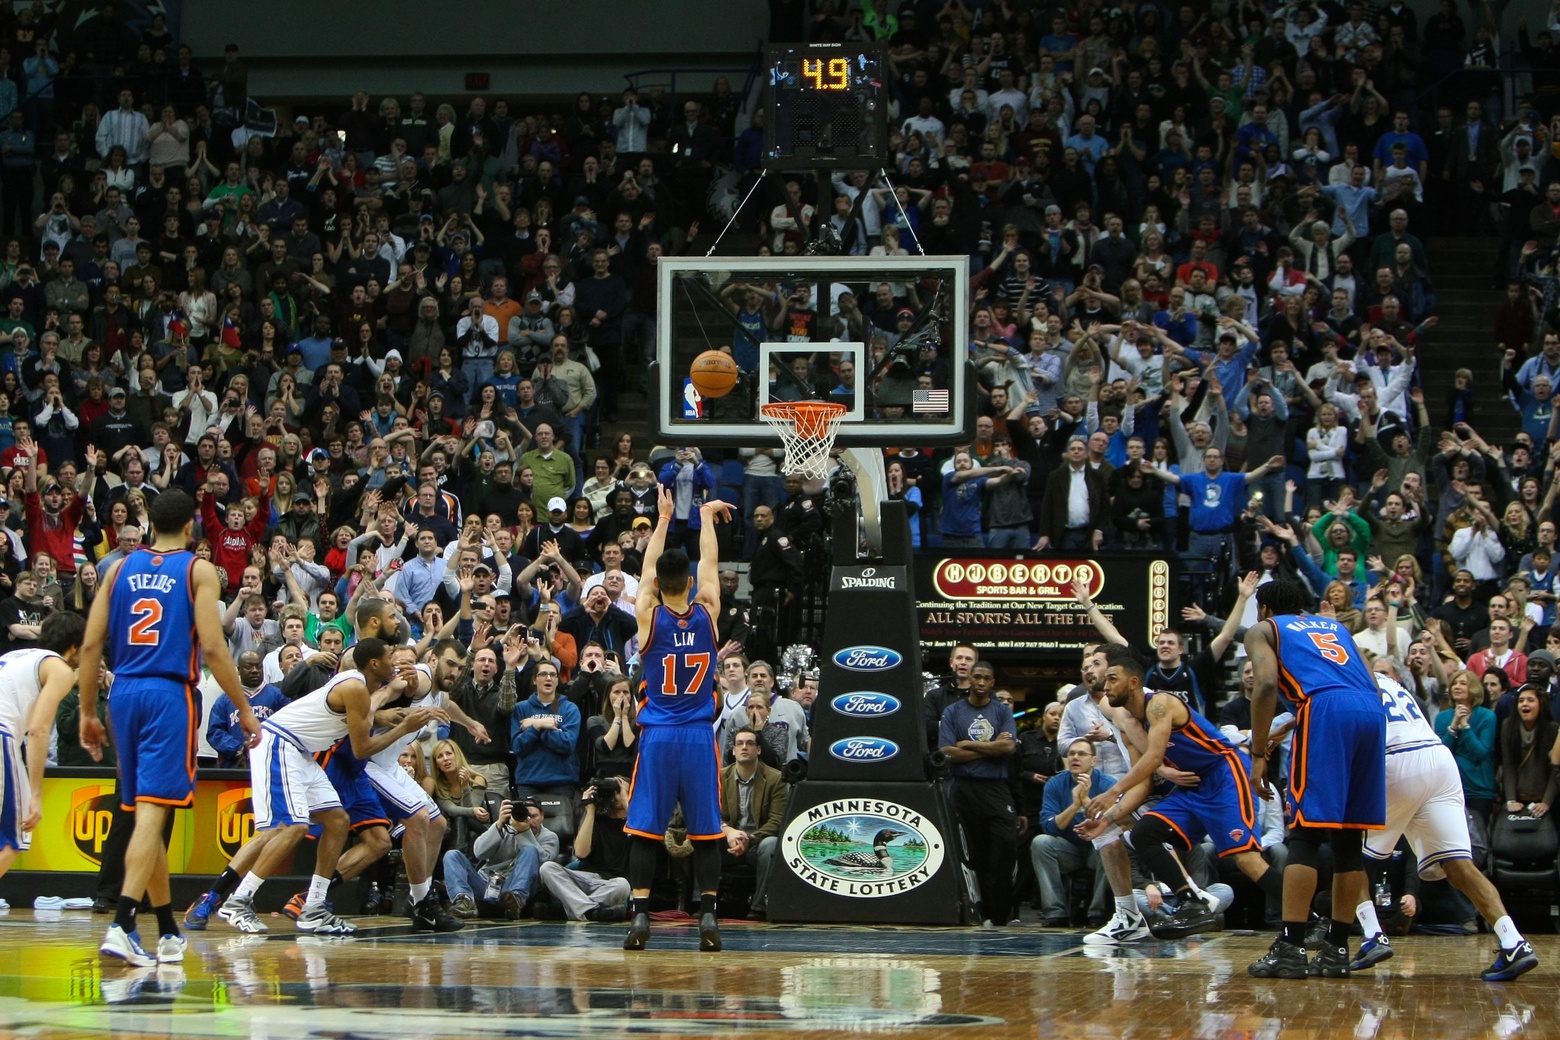 New York Knicks guard Jeremy Lin (17) makes the game-winning free throw during the fourth quarter against the Minnesota Timberwolves at the Target Center. The Knicks defeated the Timberwolves 100-98.